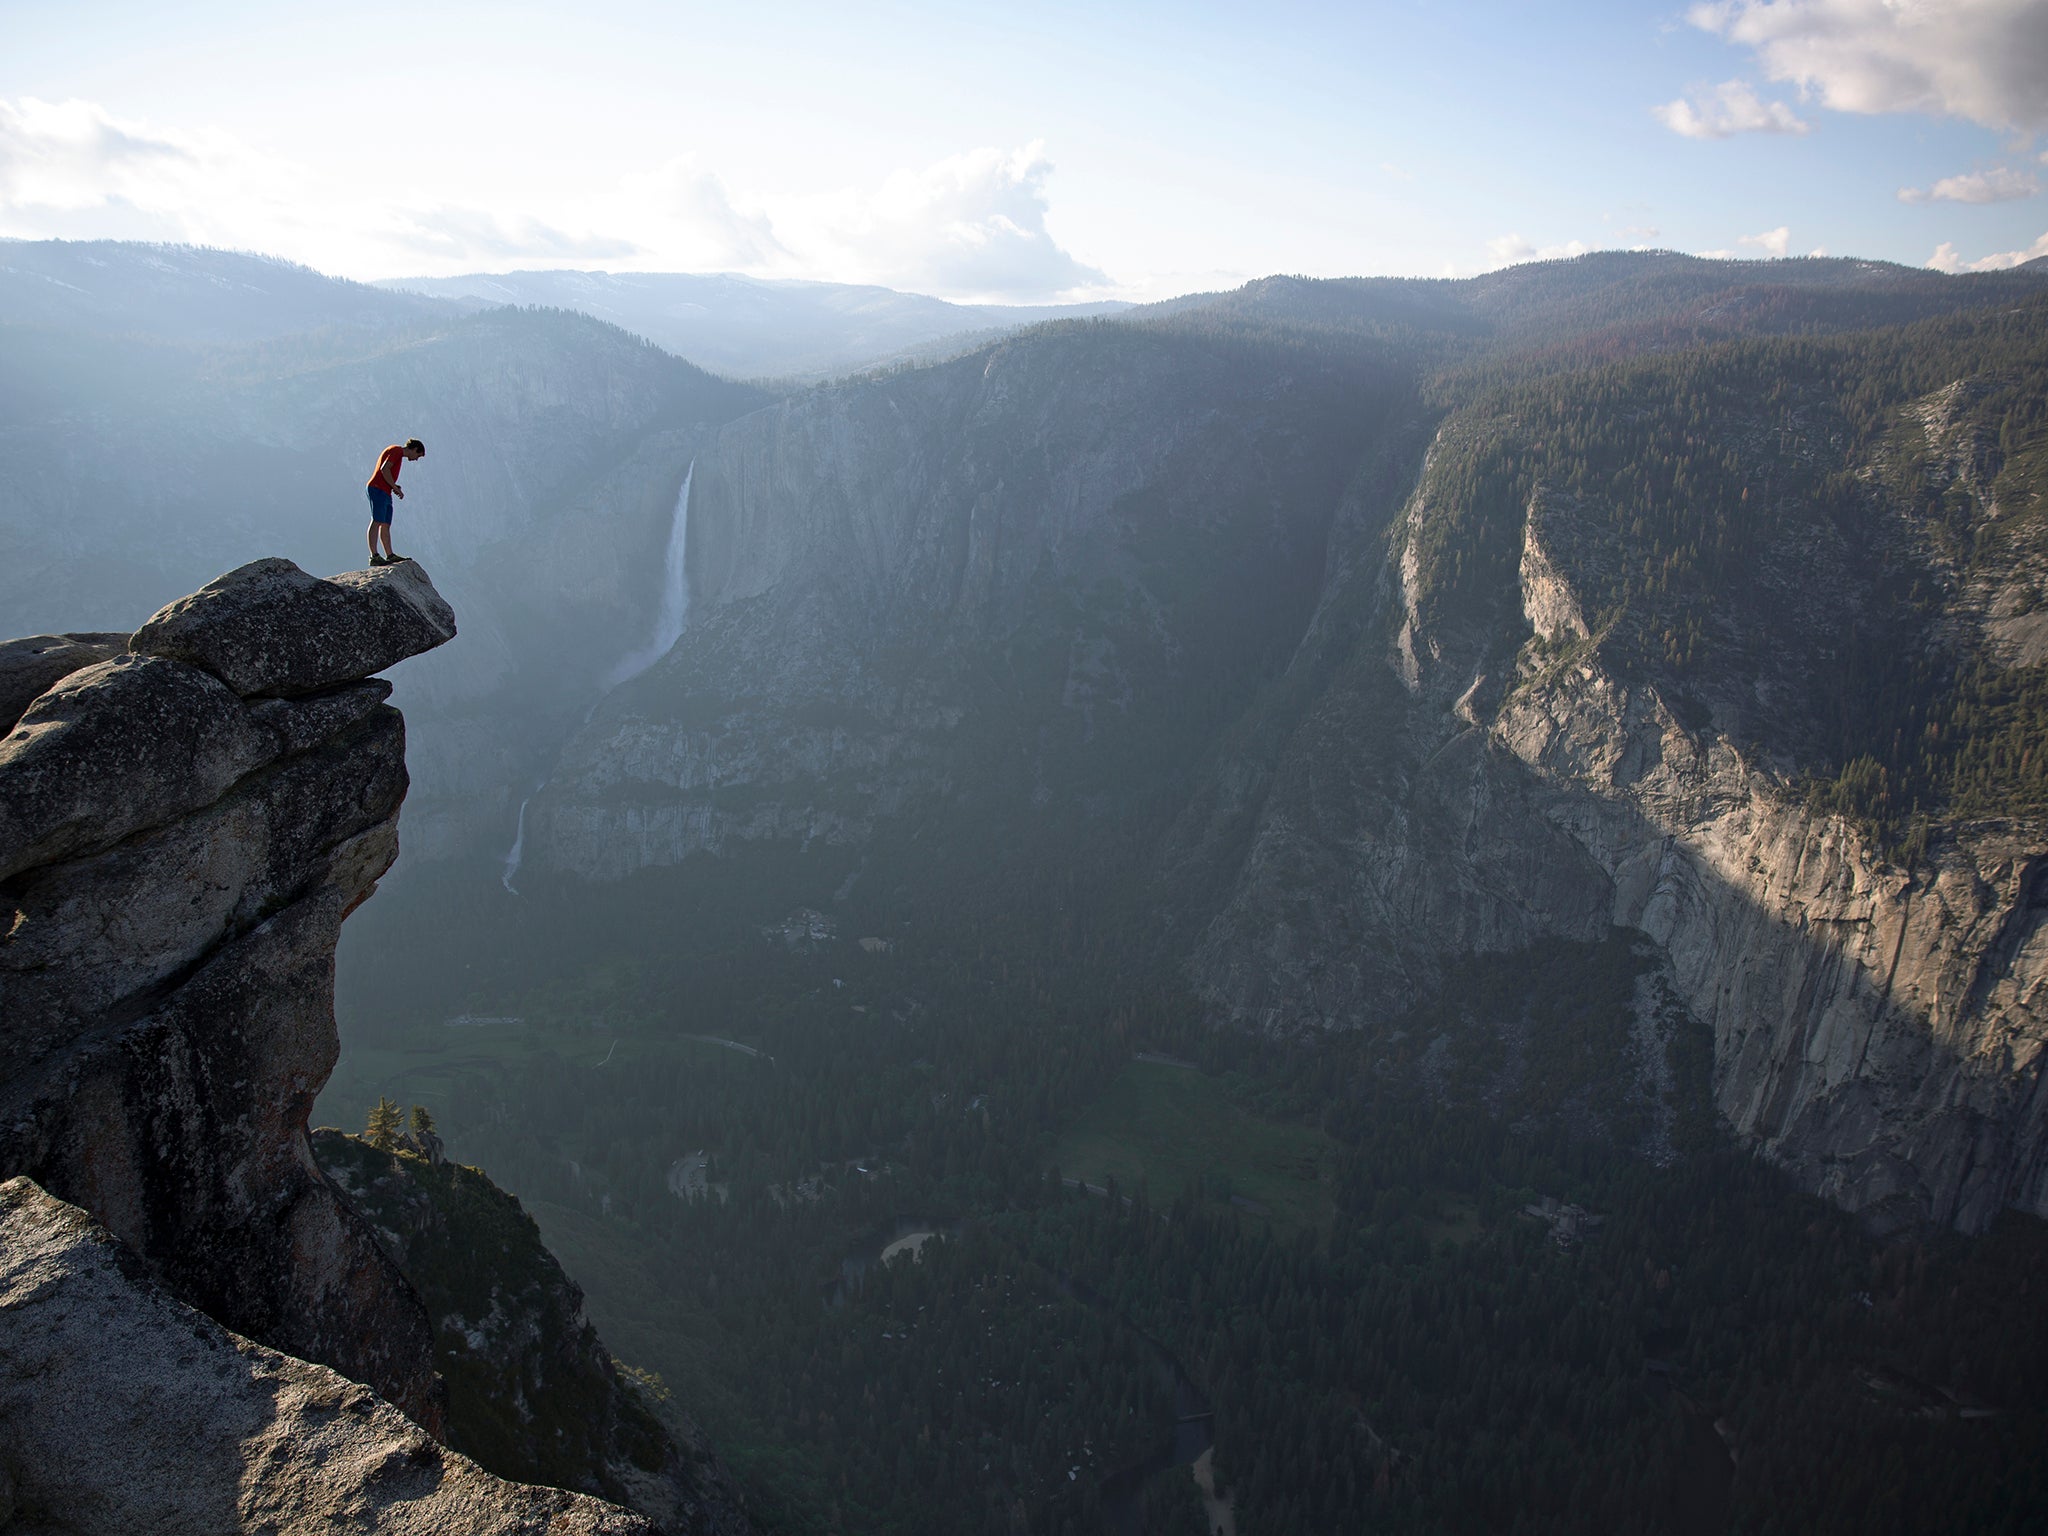 Honnold peers over the edge of Glacier Point in Yosemite national park